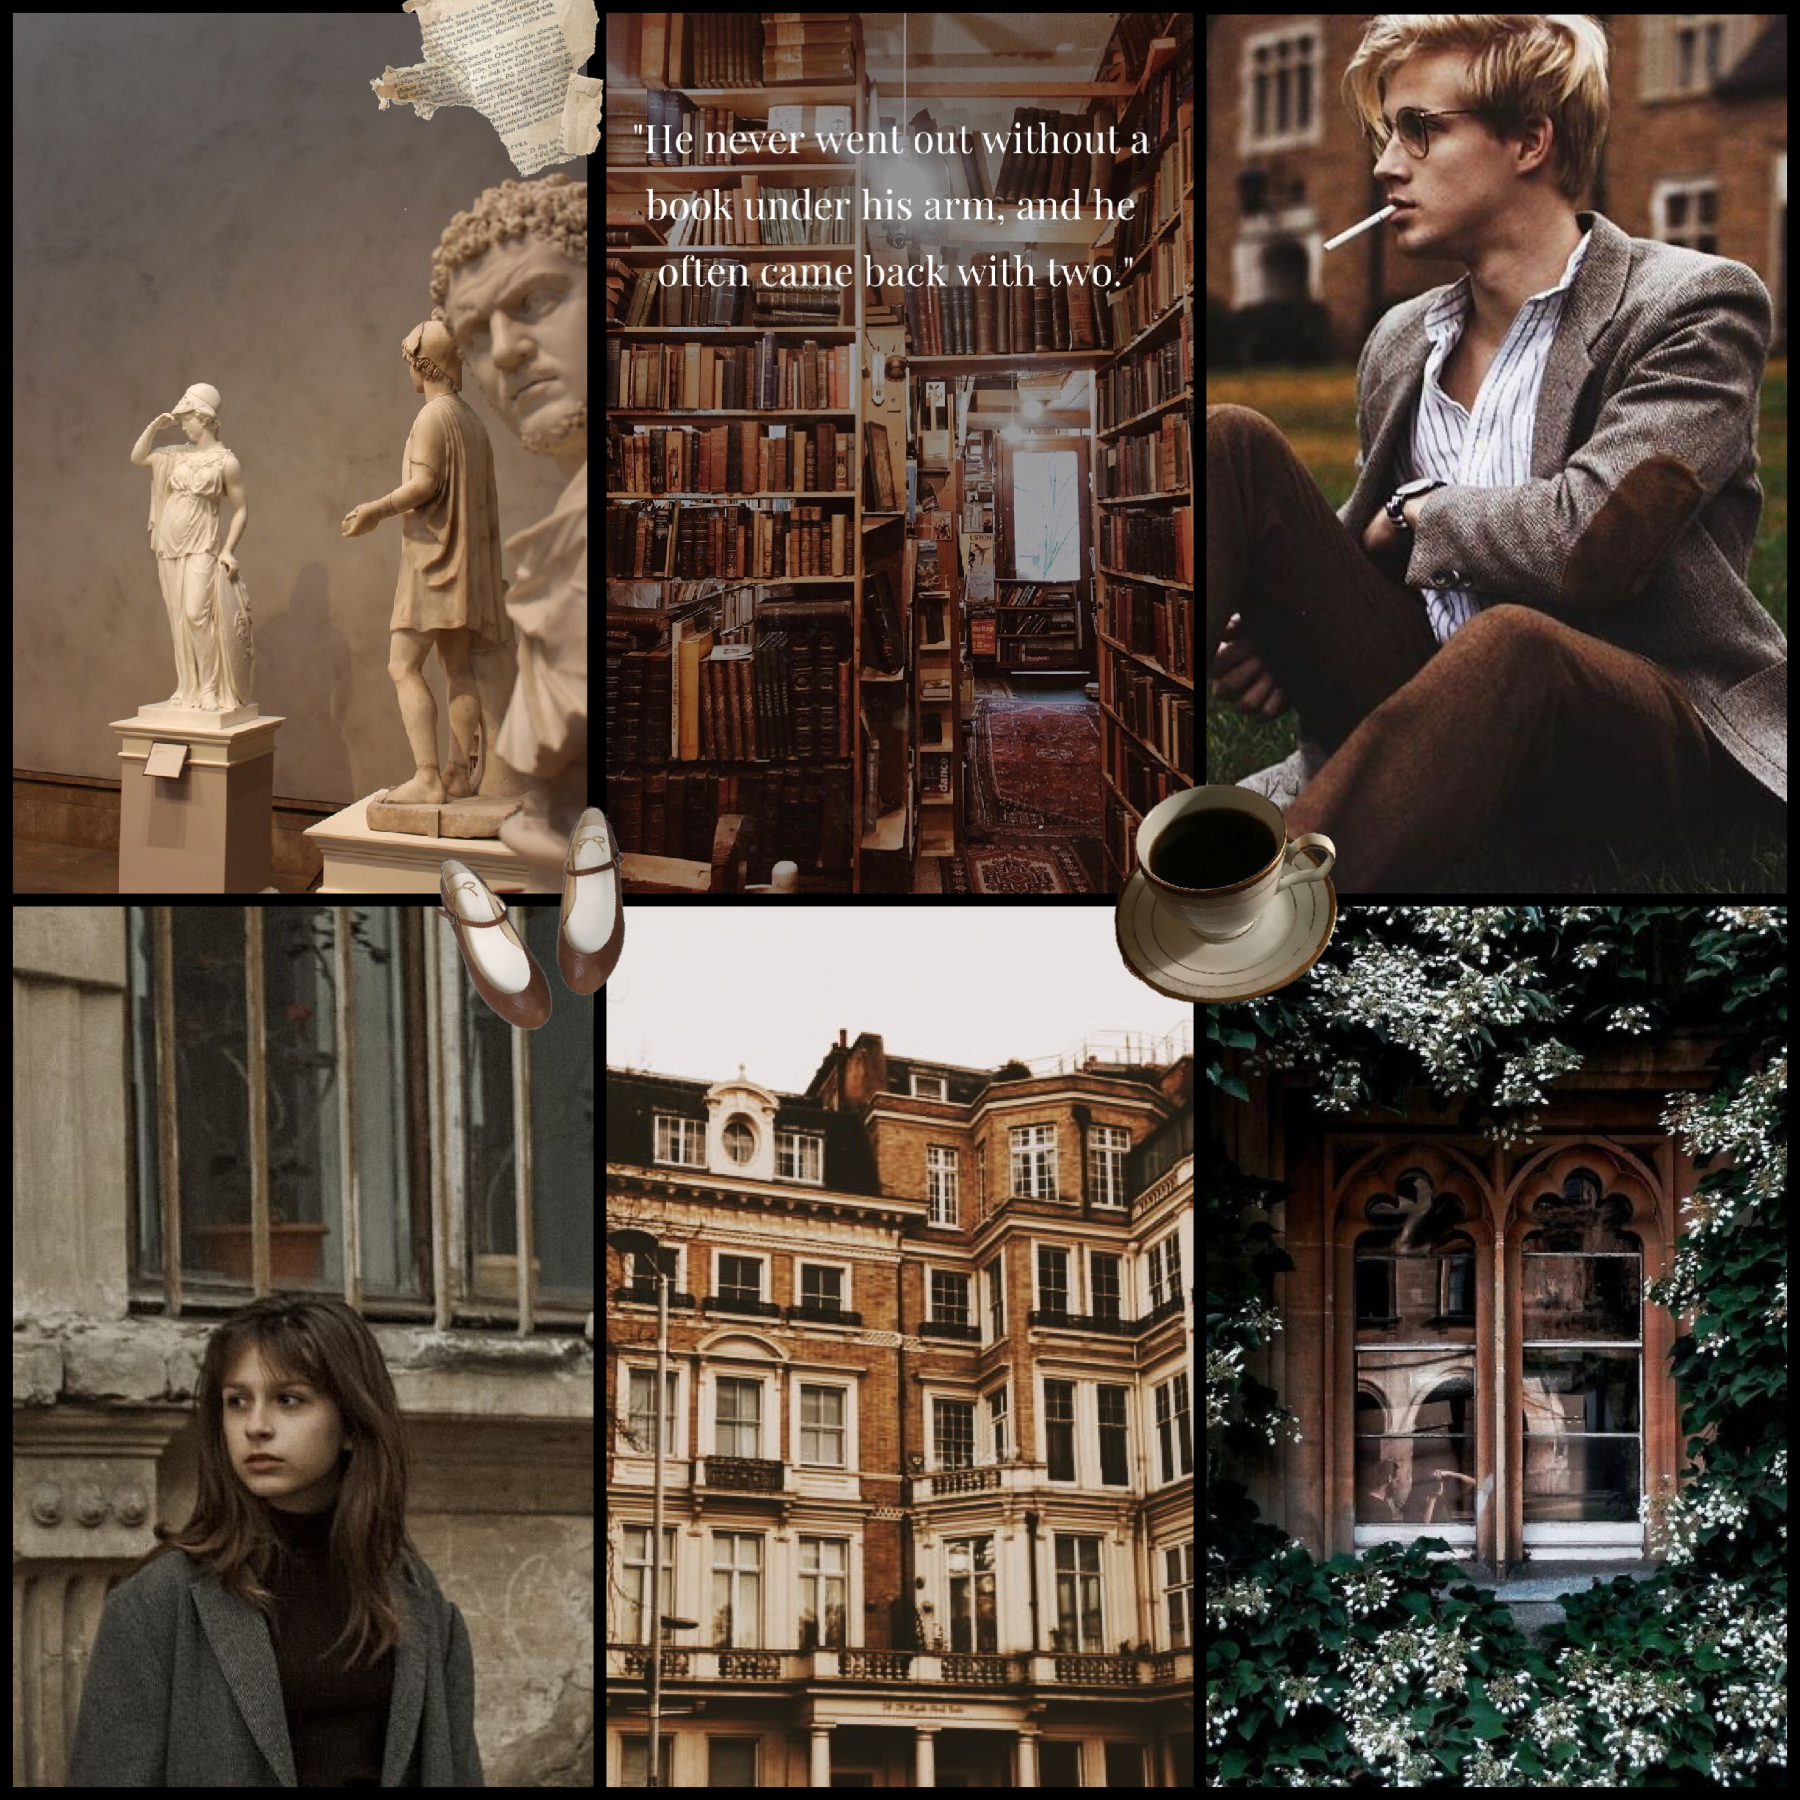 Dark Academia is my fall AESTHETIC. Ps the girl in this collage is preeettyyy. 🥺👉👈